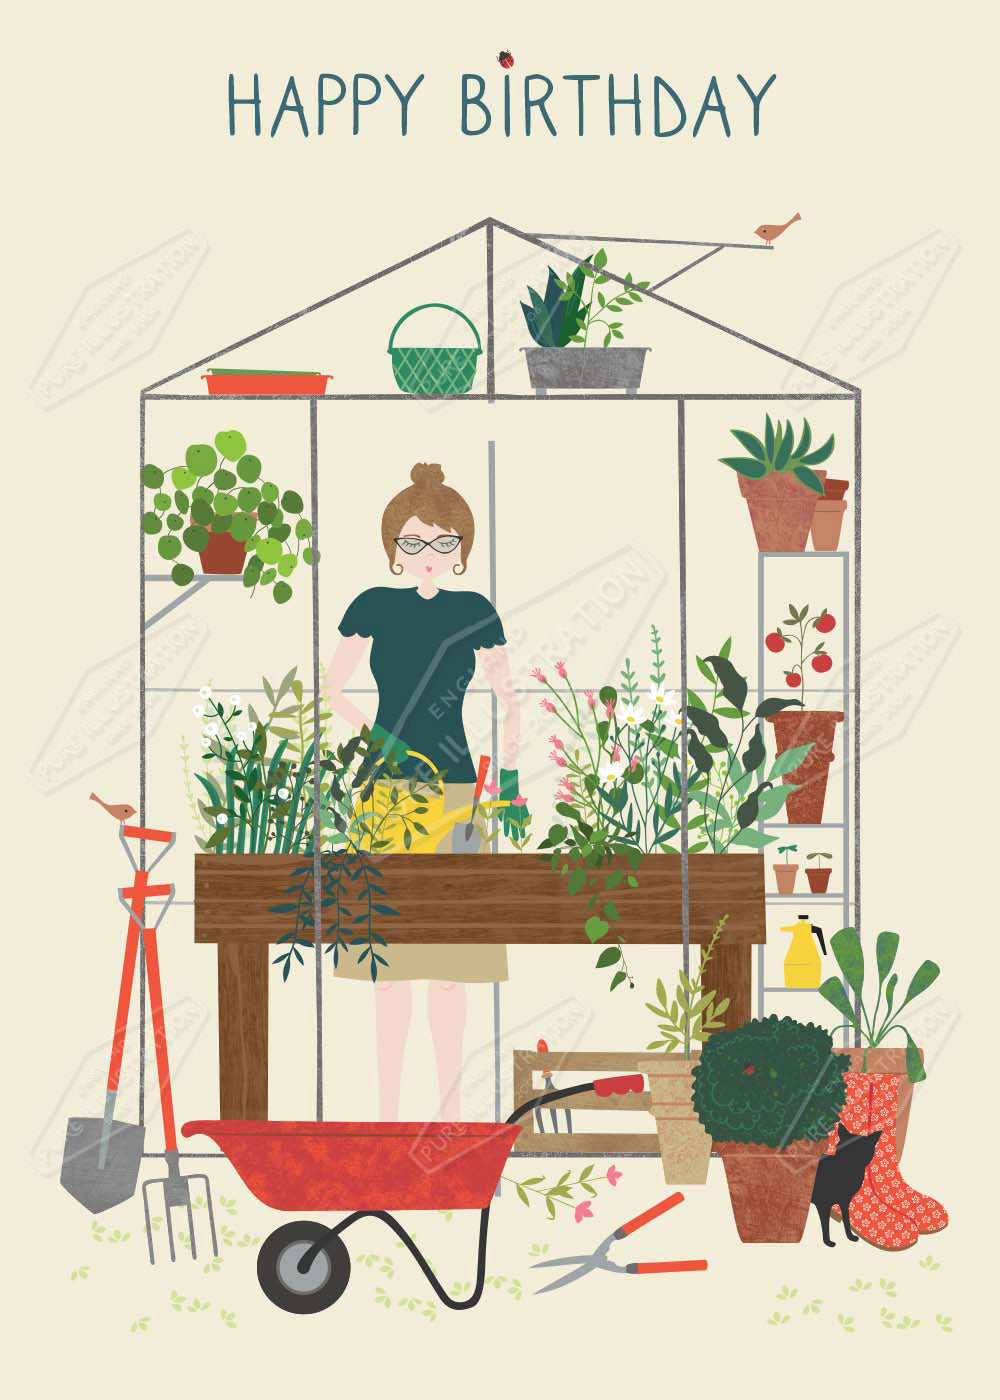 Gardening Greenhouse Illustration by Gill Eggleston for Pure Art Licensing Agency & Surface Design Studio